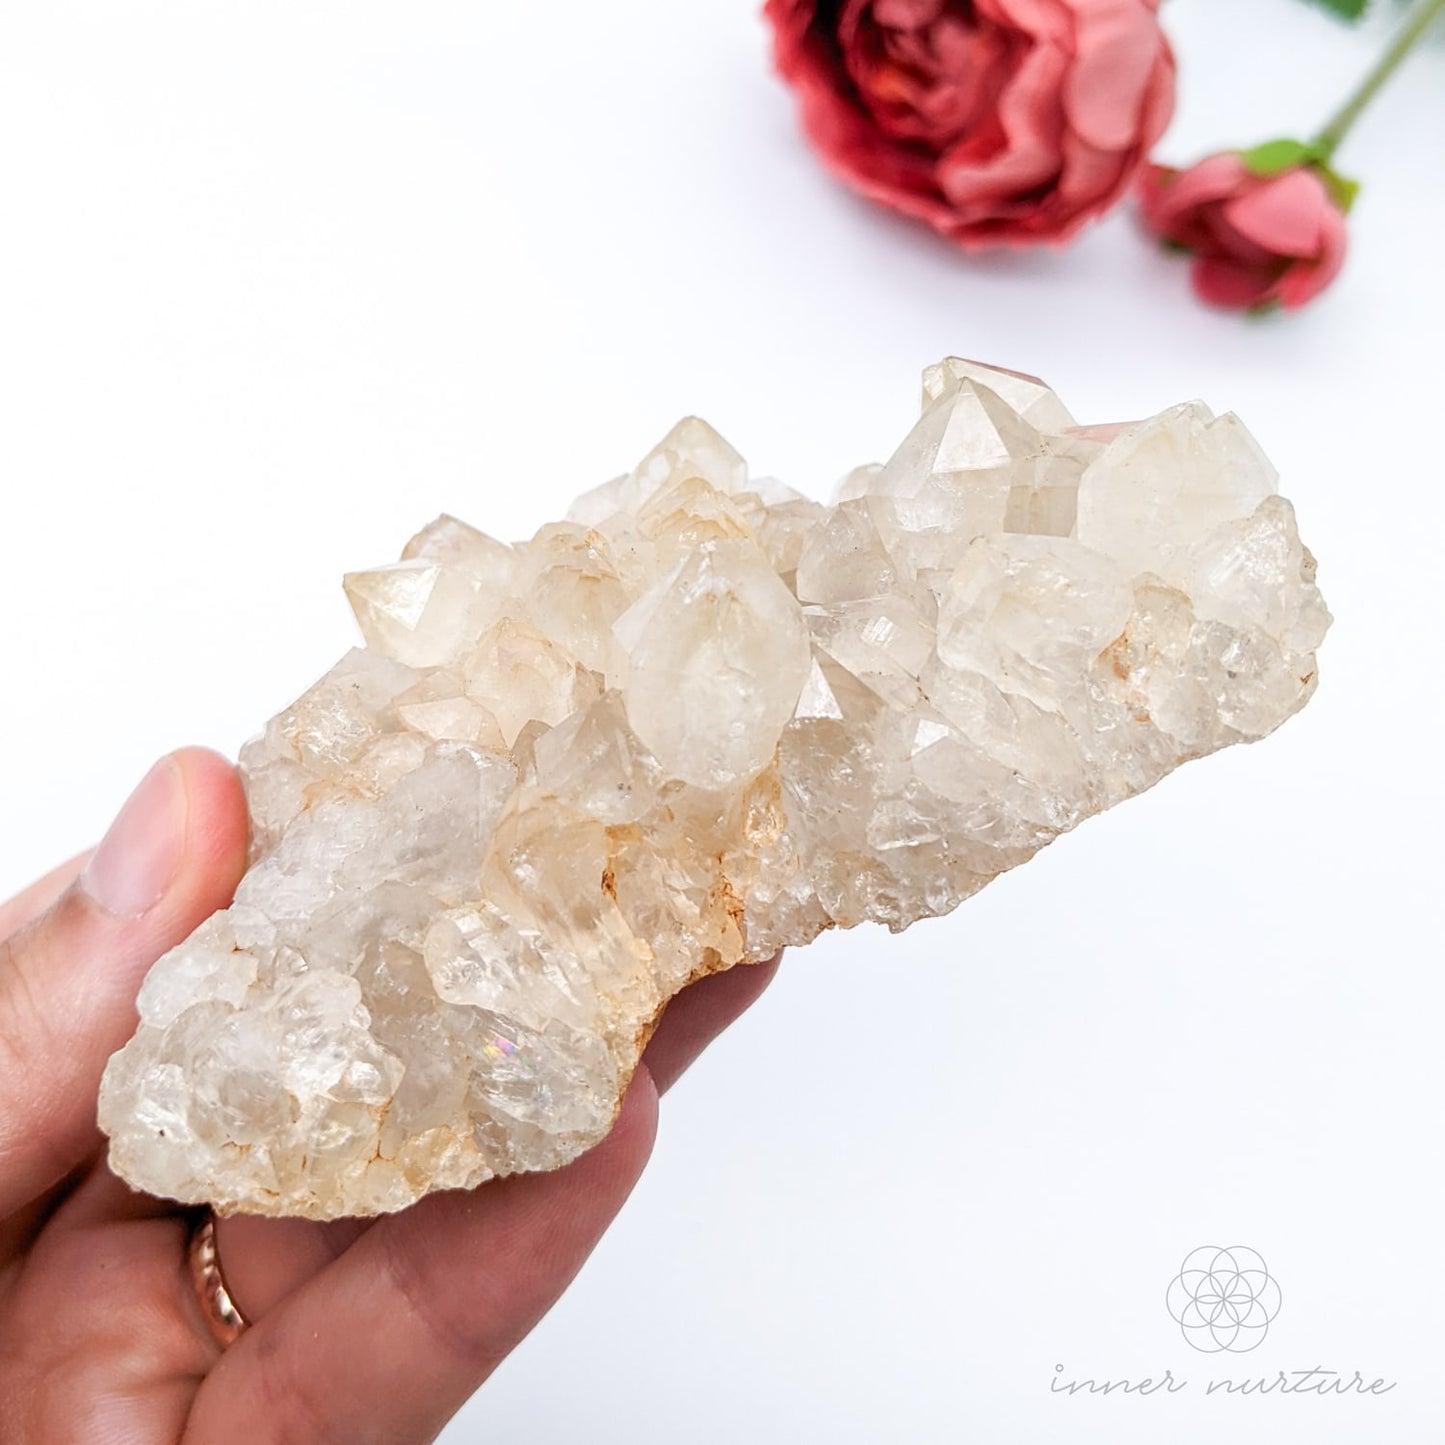 Clear Quartz Cluster With Inclusions - #7 | Crystal Shop Australia - Inner Nurture